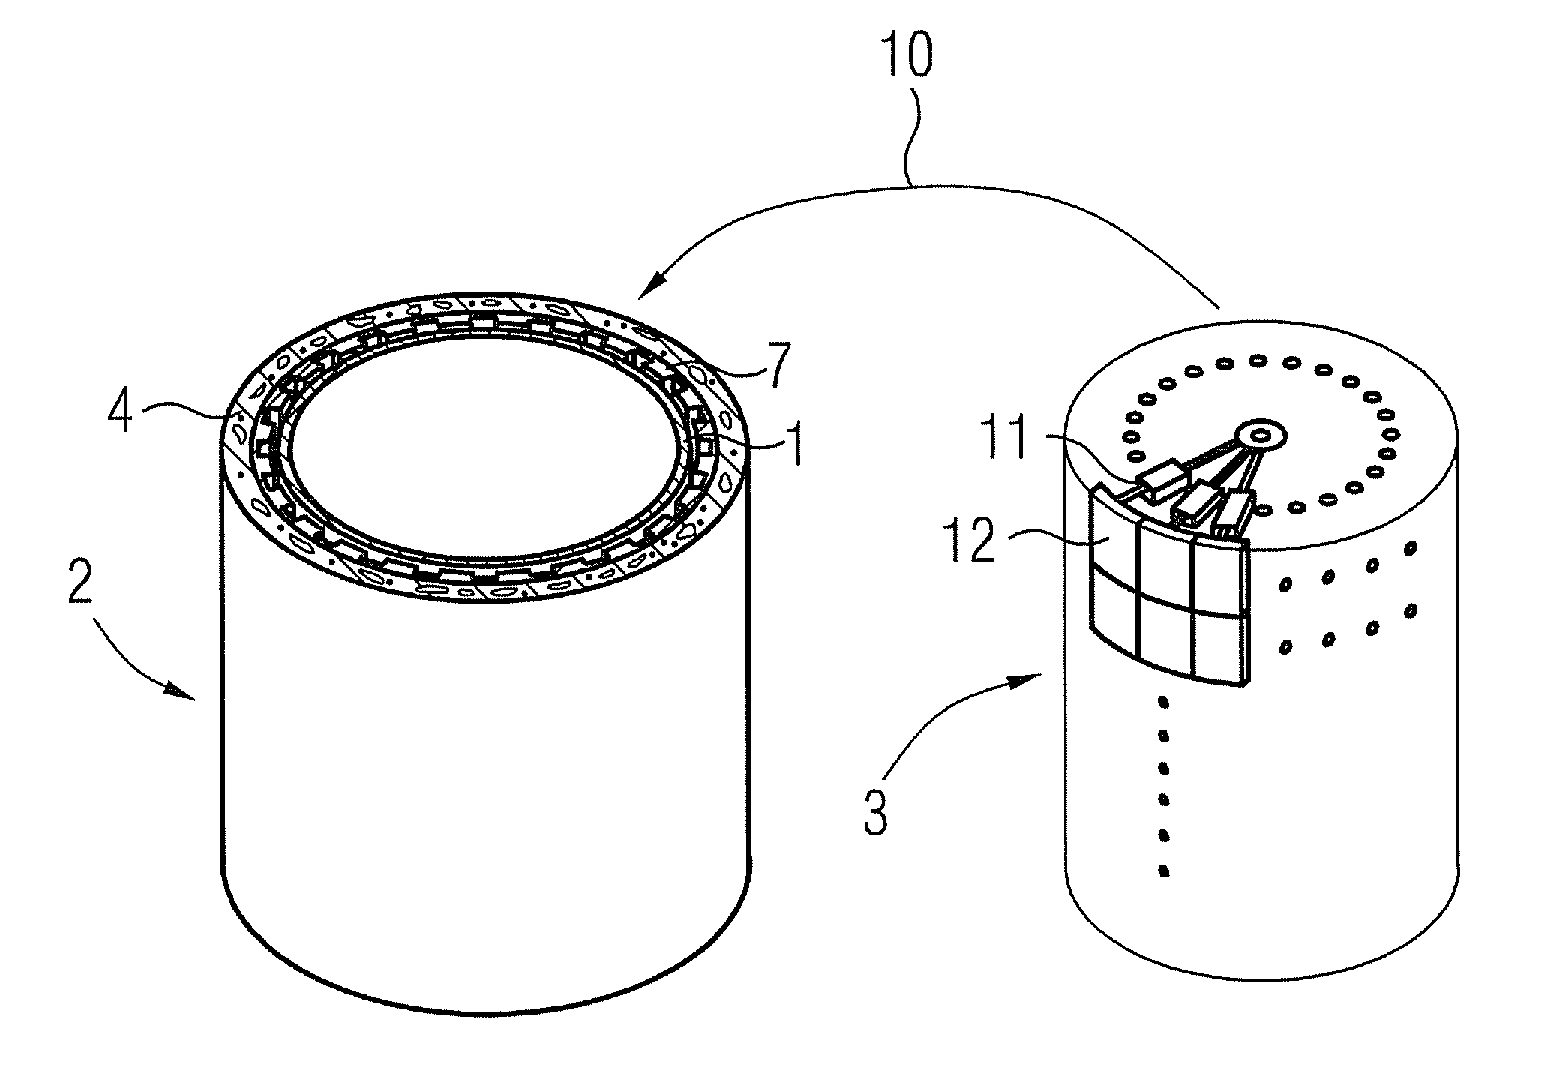 Method and apparatus for manufacturing a rotor